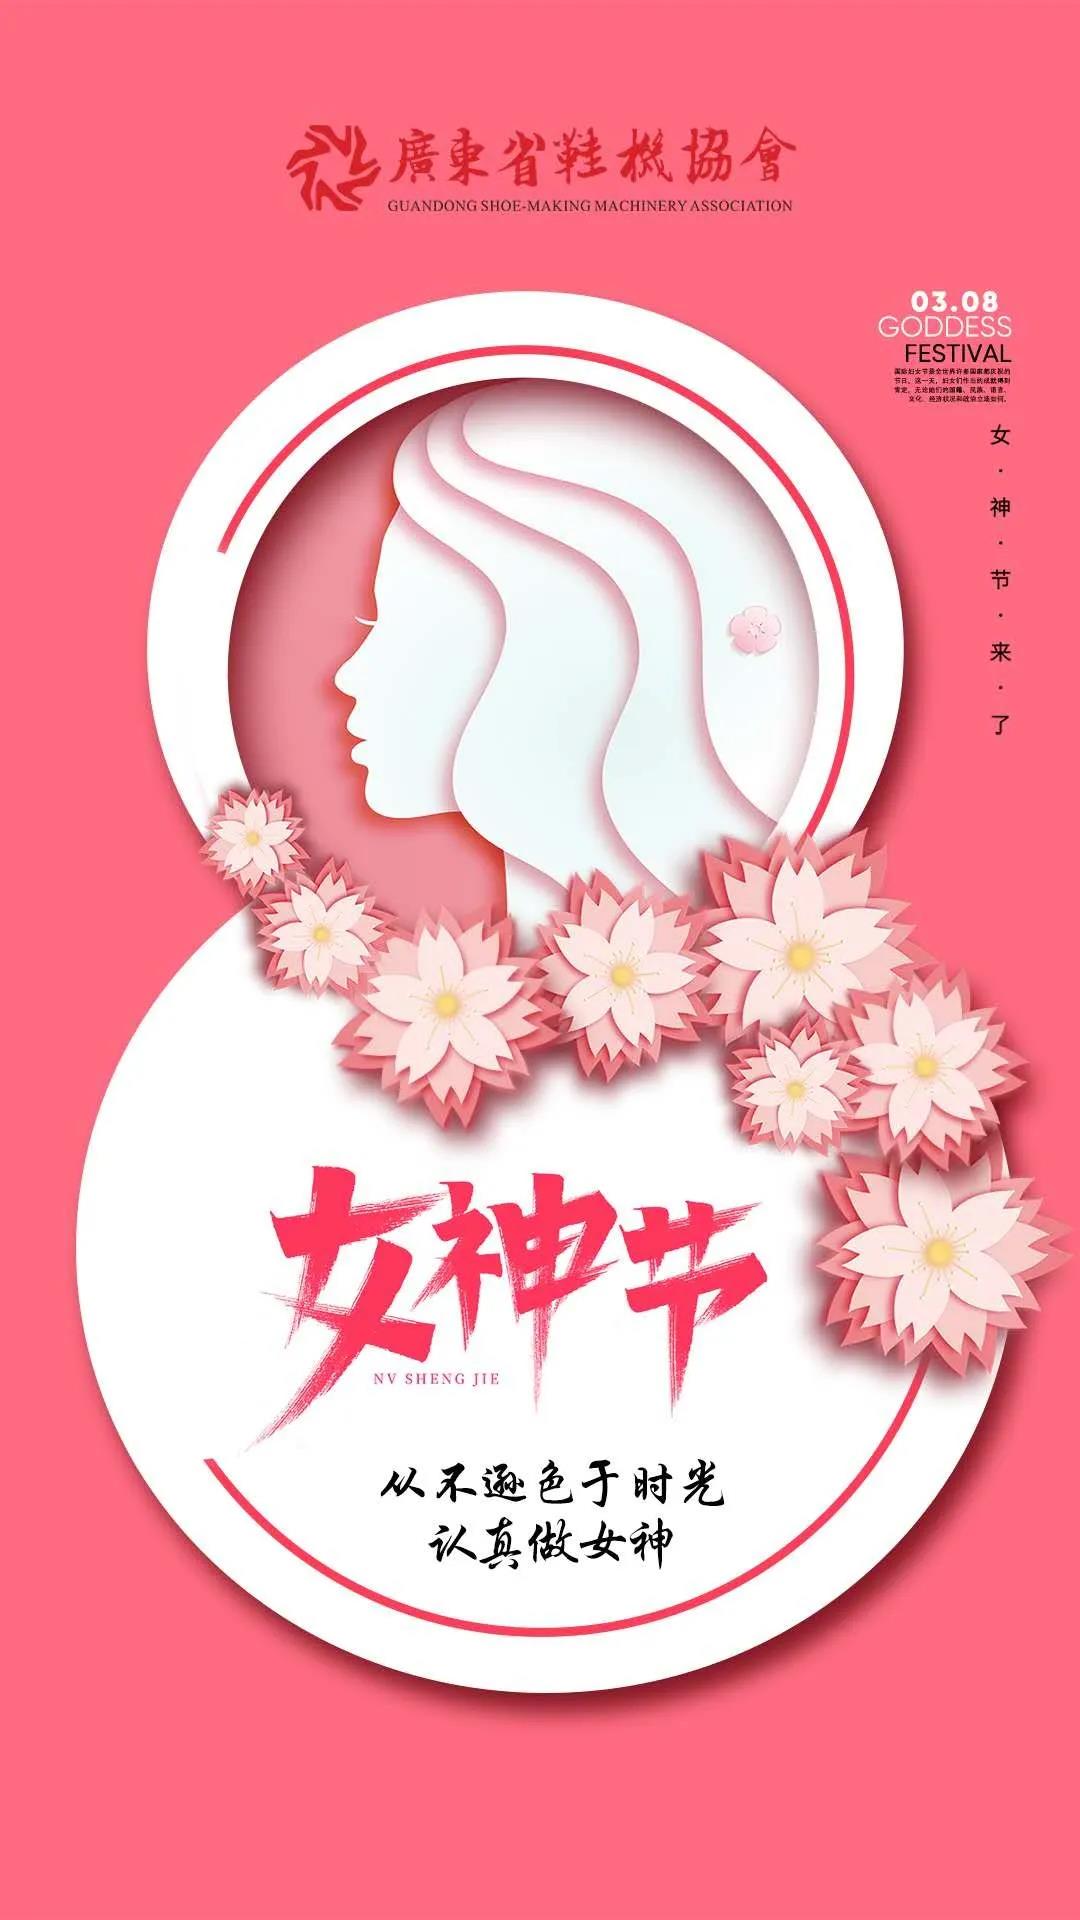 Guangdong Shoe Machinery Association wishes all goddesses a happy holiday!